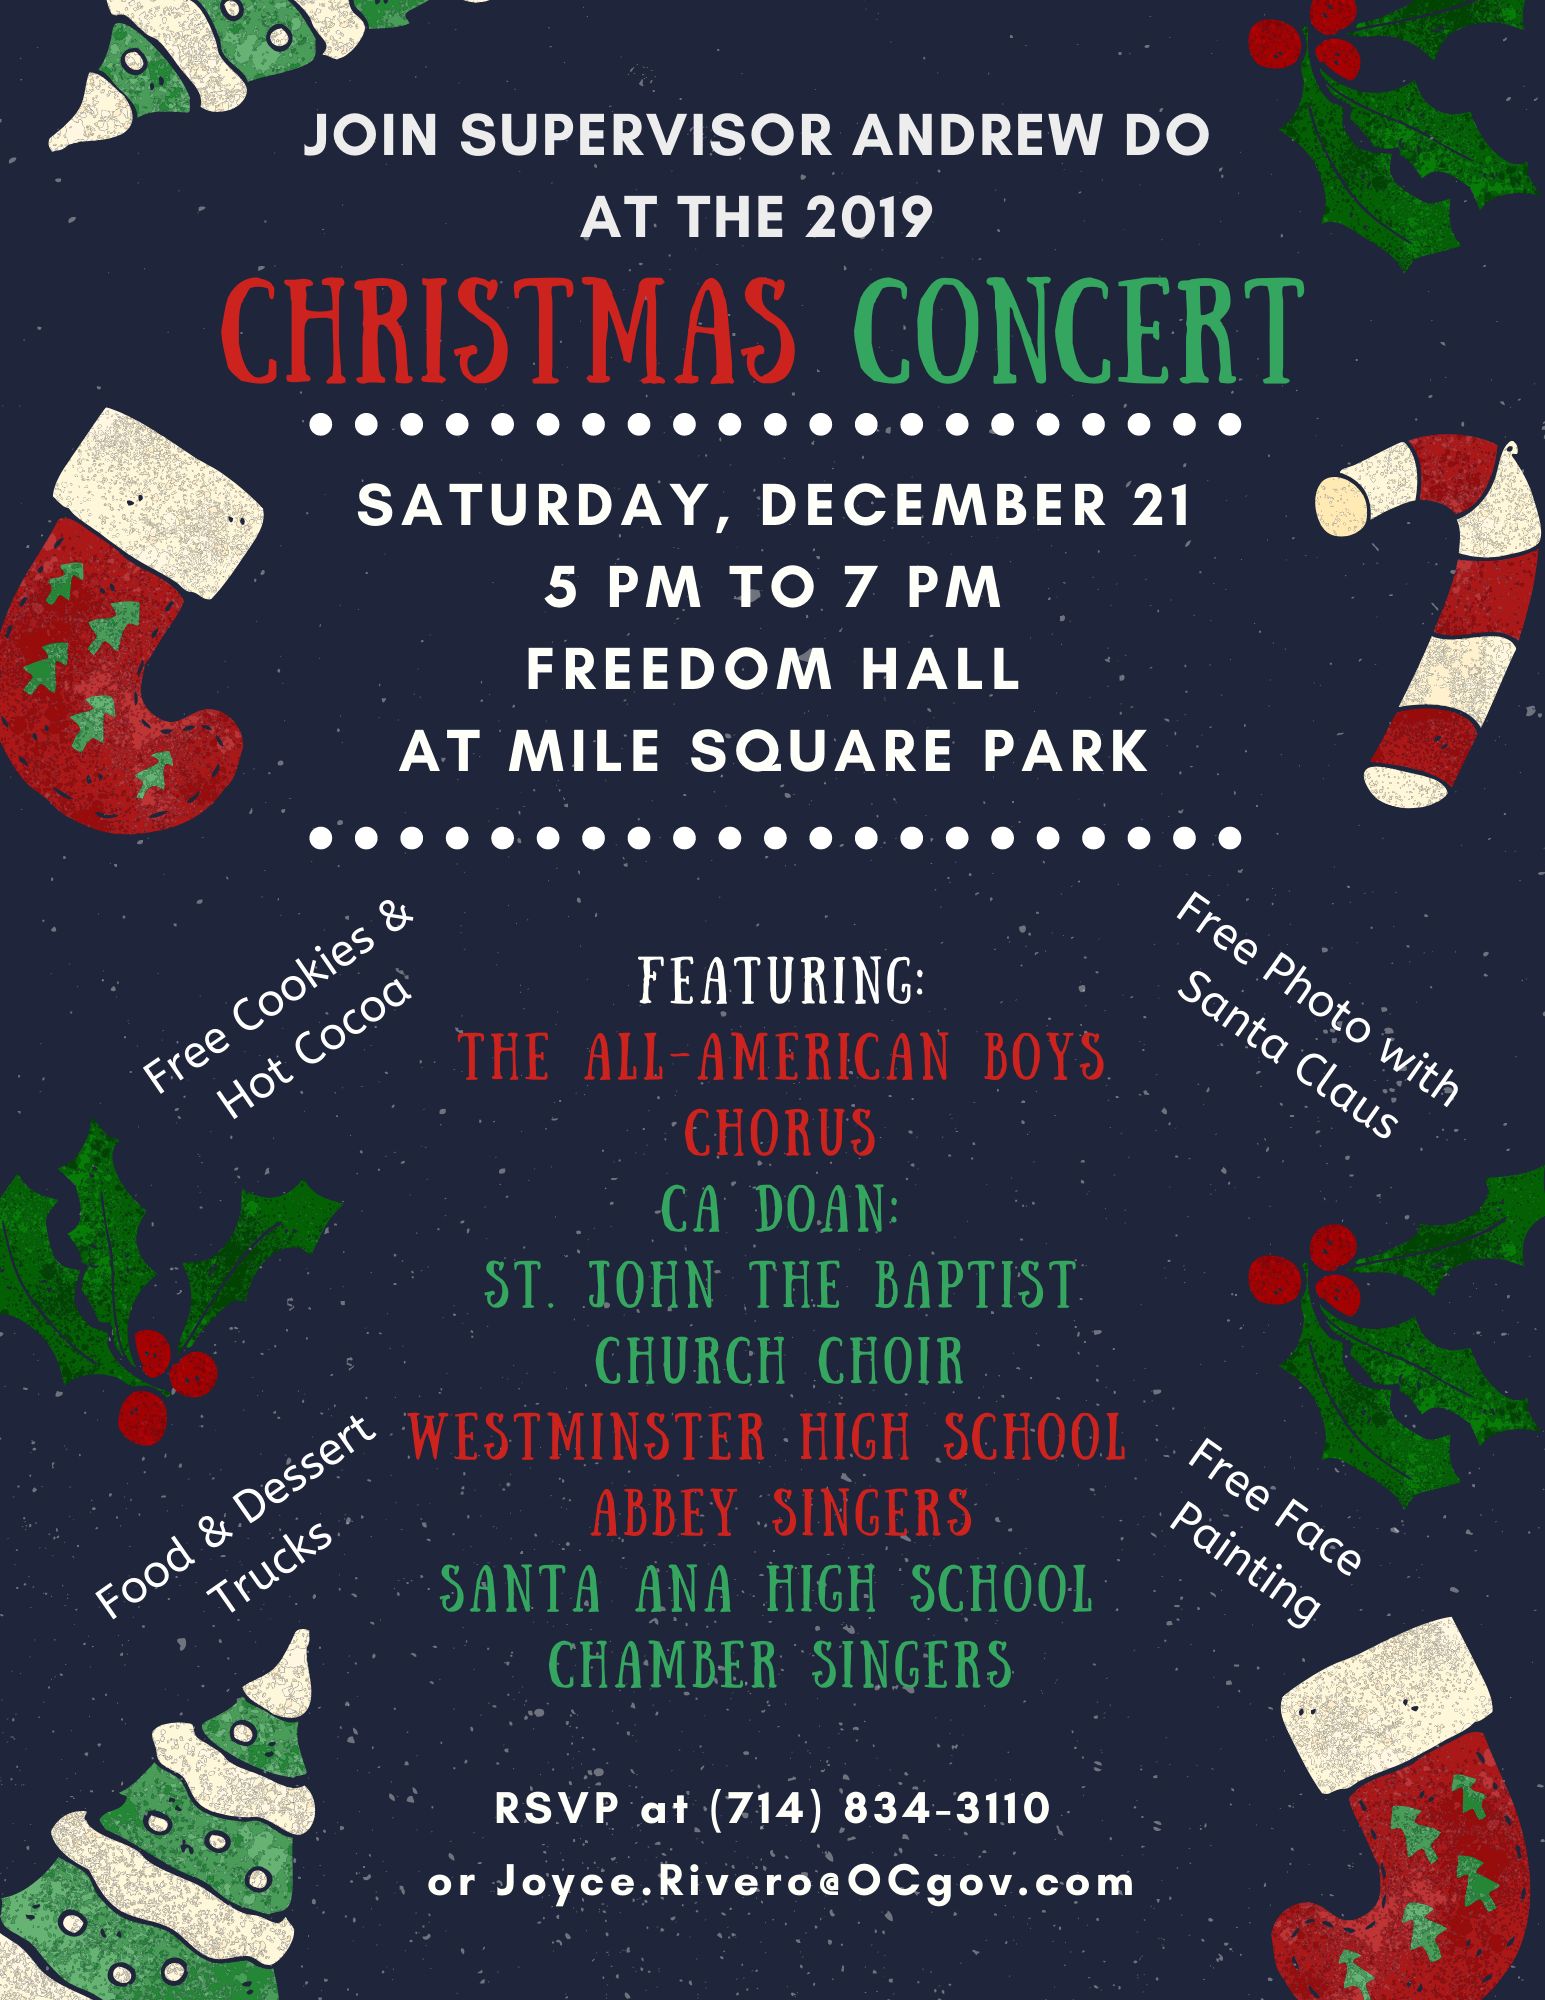 Come Celebrate Christmas at the Annual Free Concert Event First